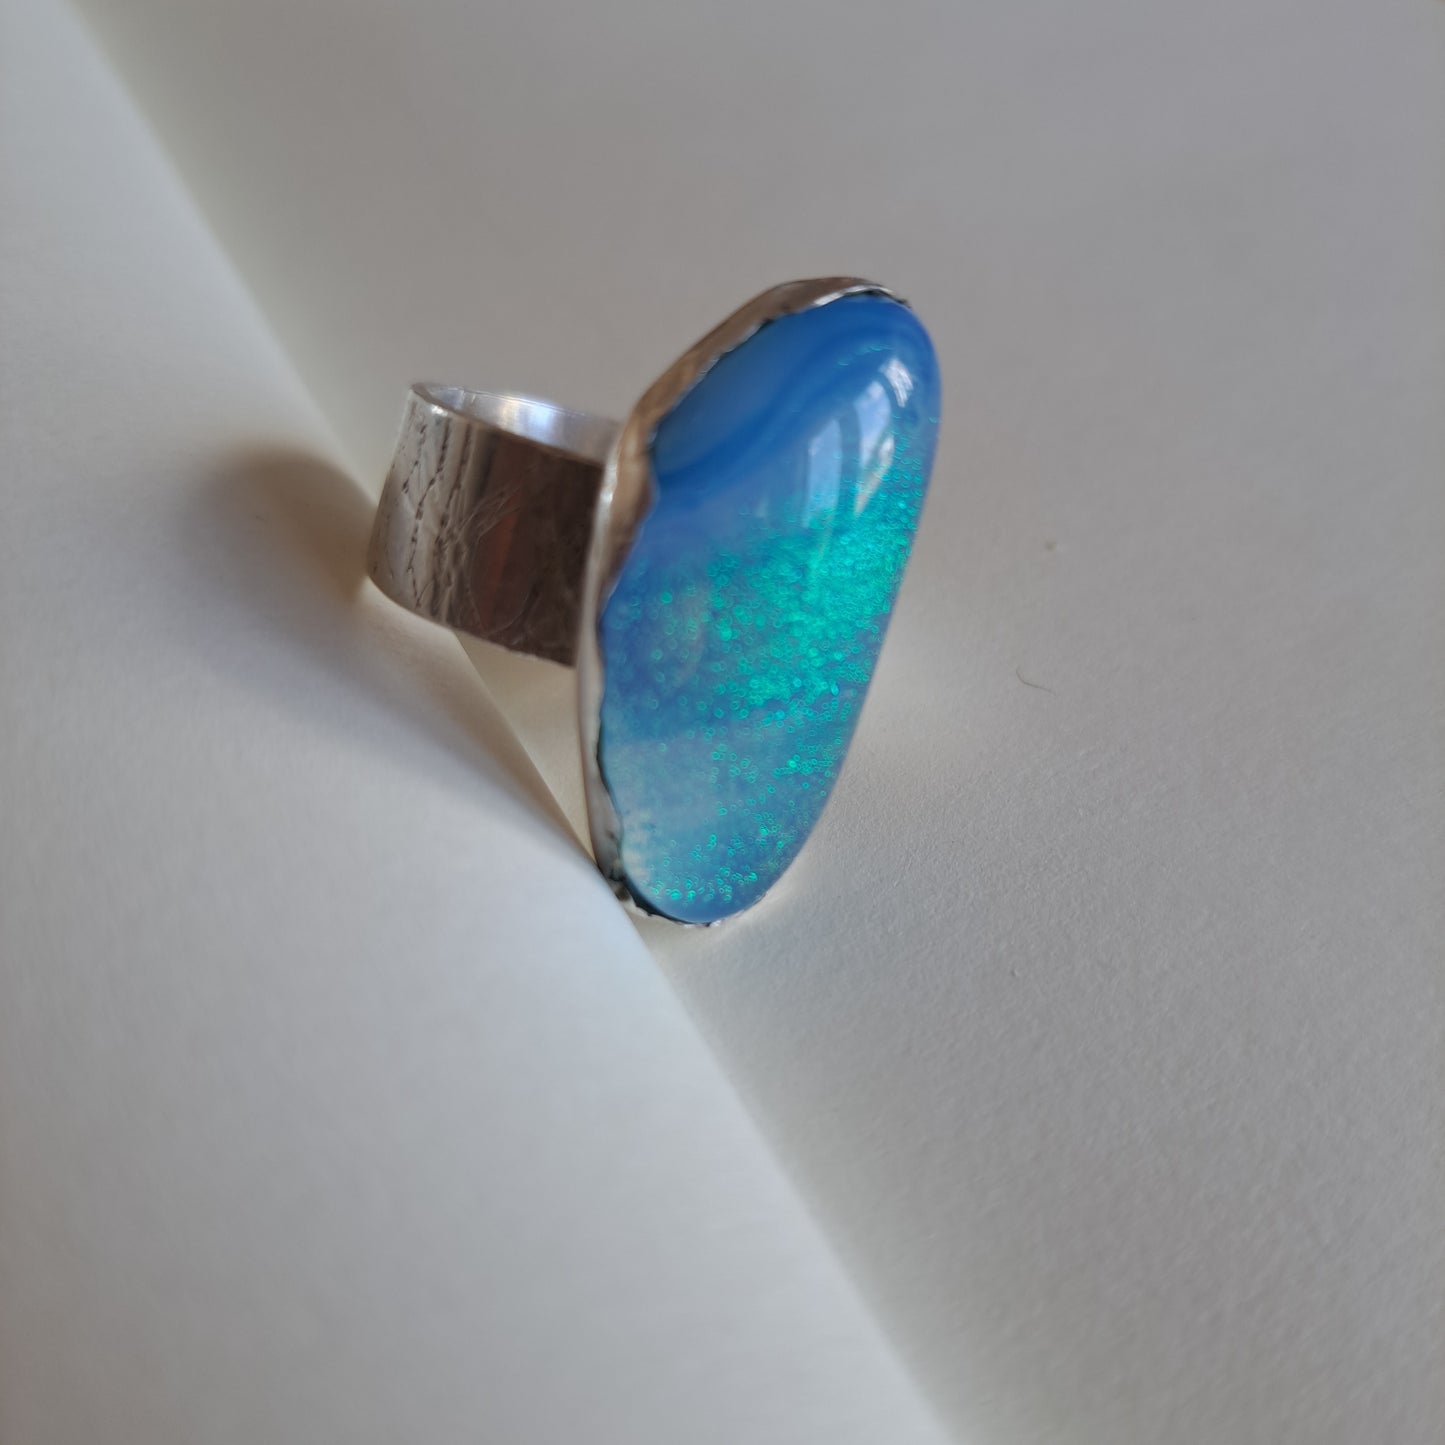 Pale blue dichroic glass and silver ring